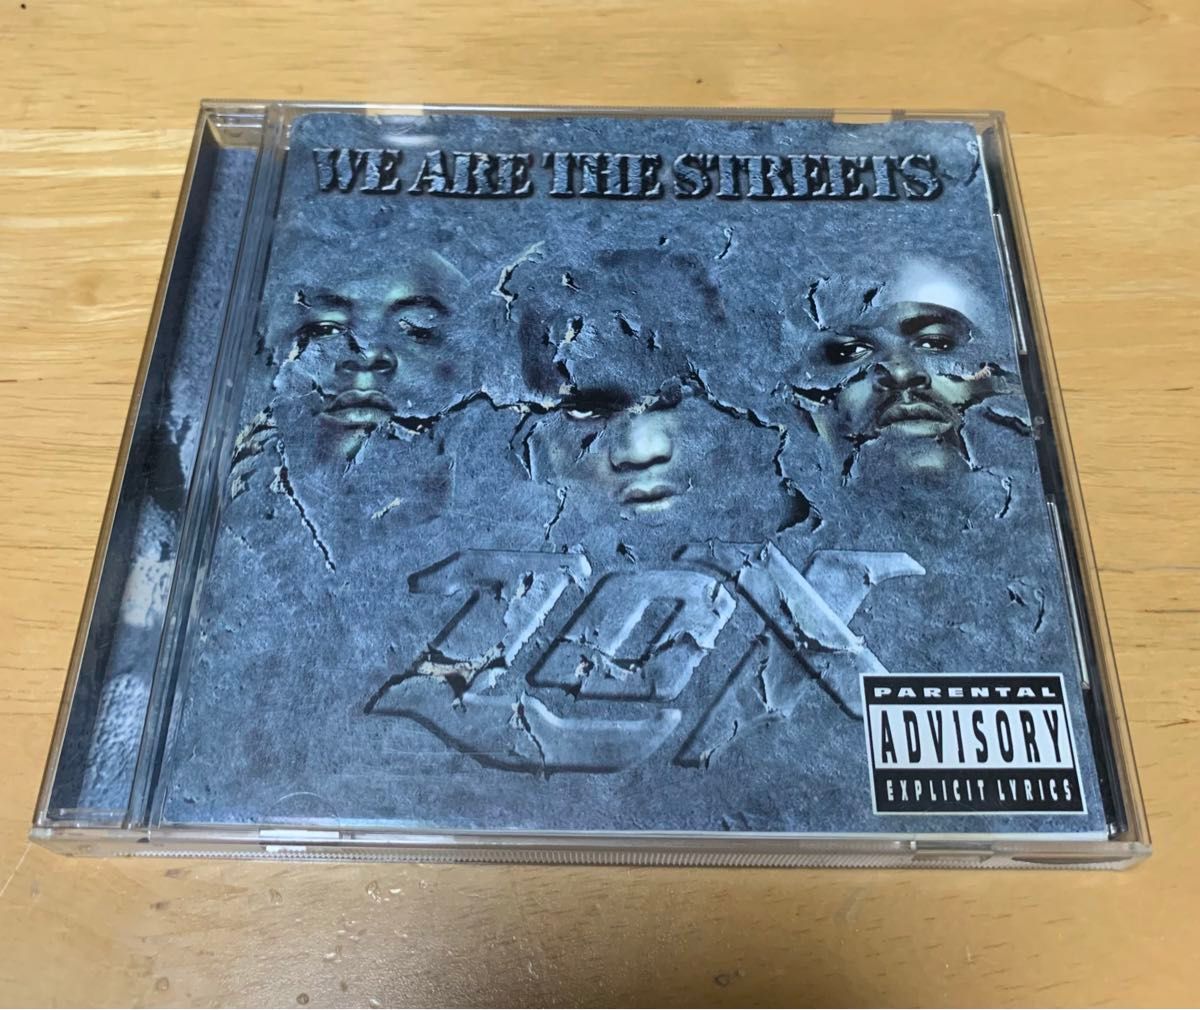 lox we are the streets CD